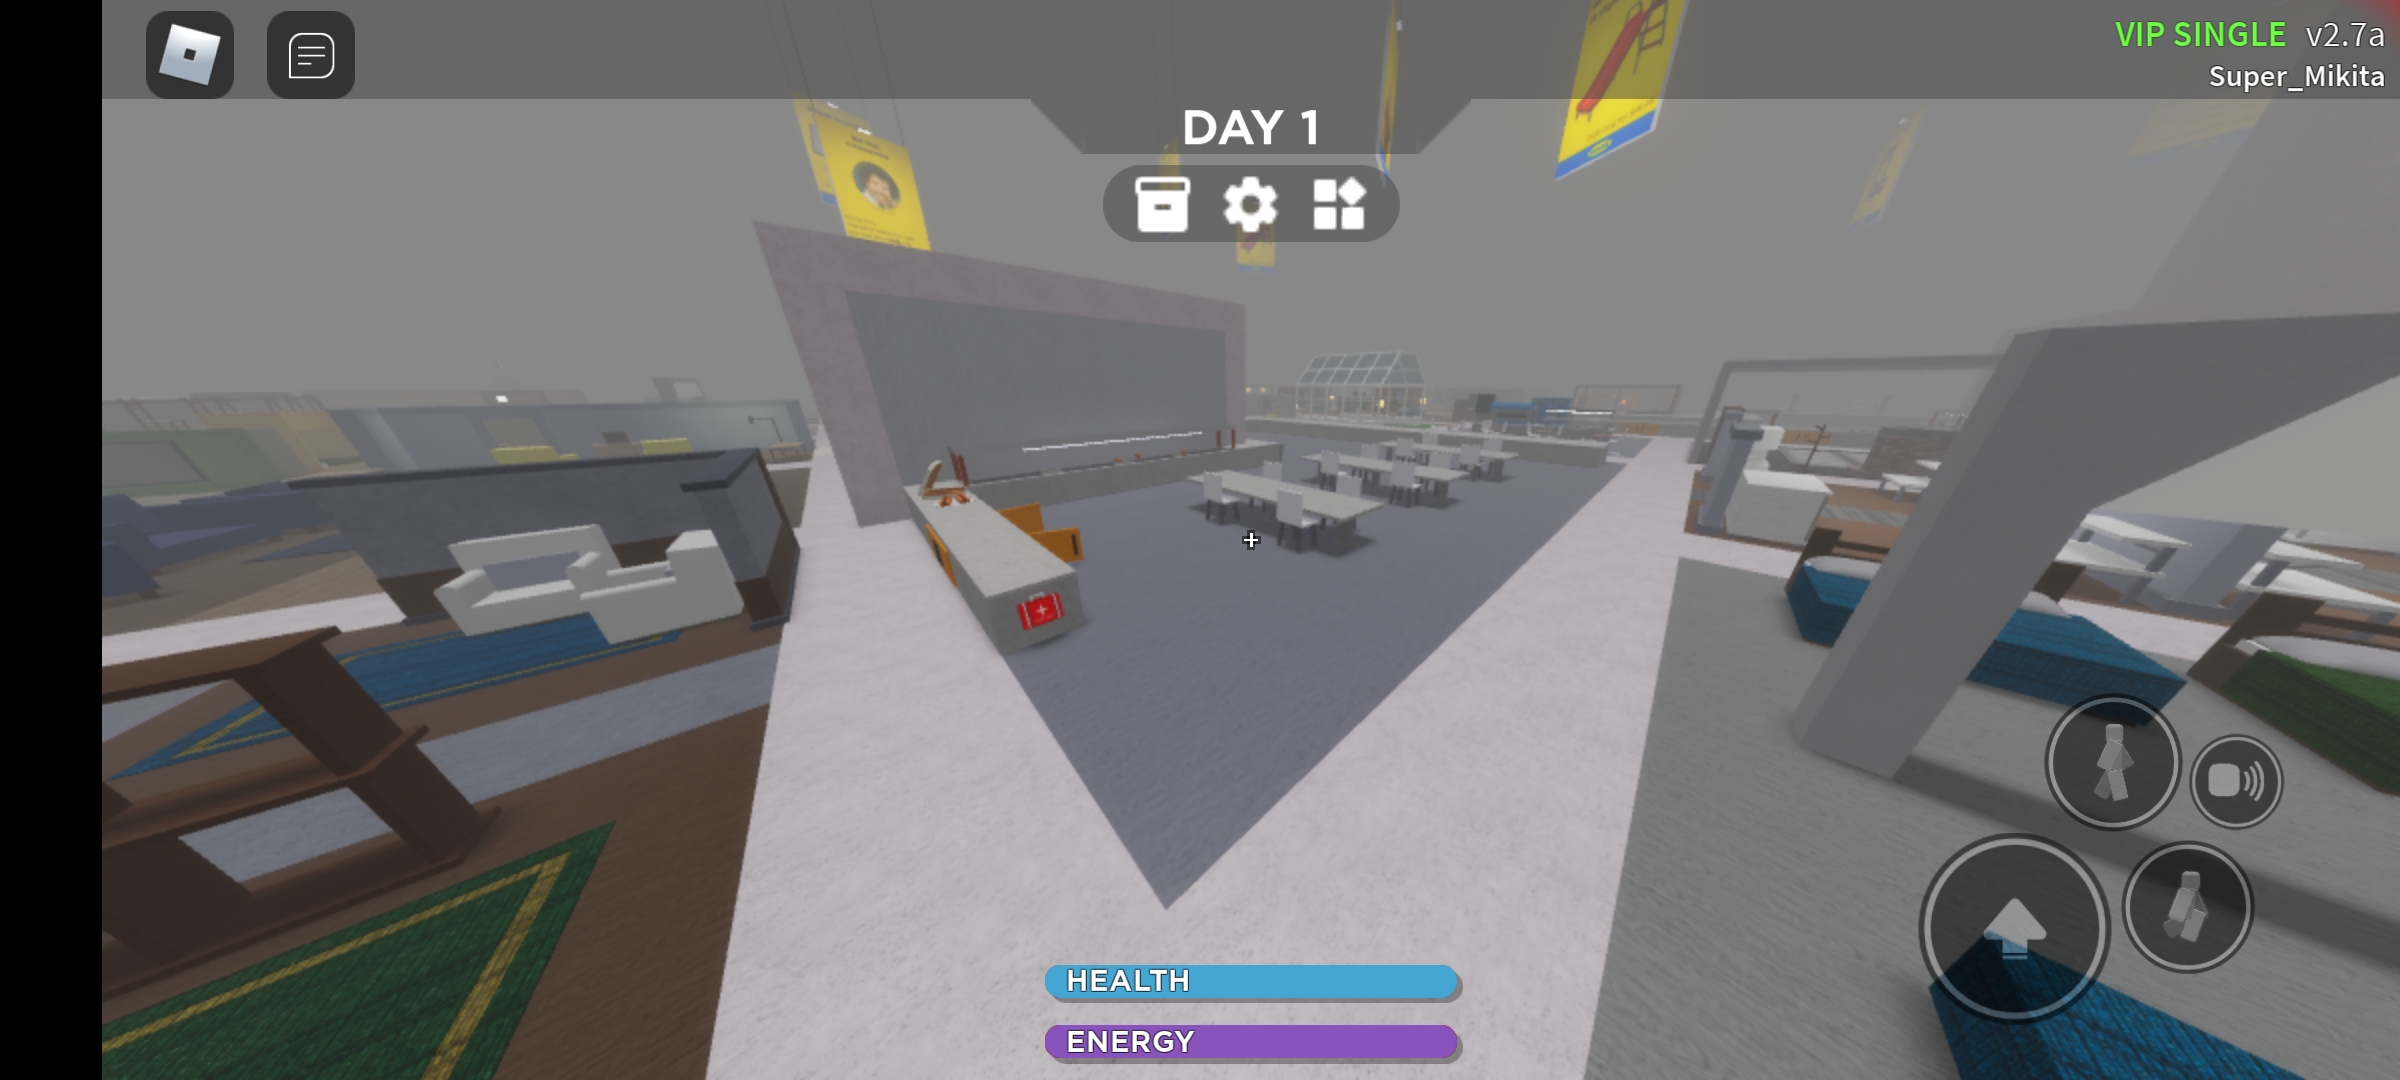 How To Beat SCP 3008 In Roblox 